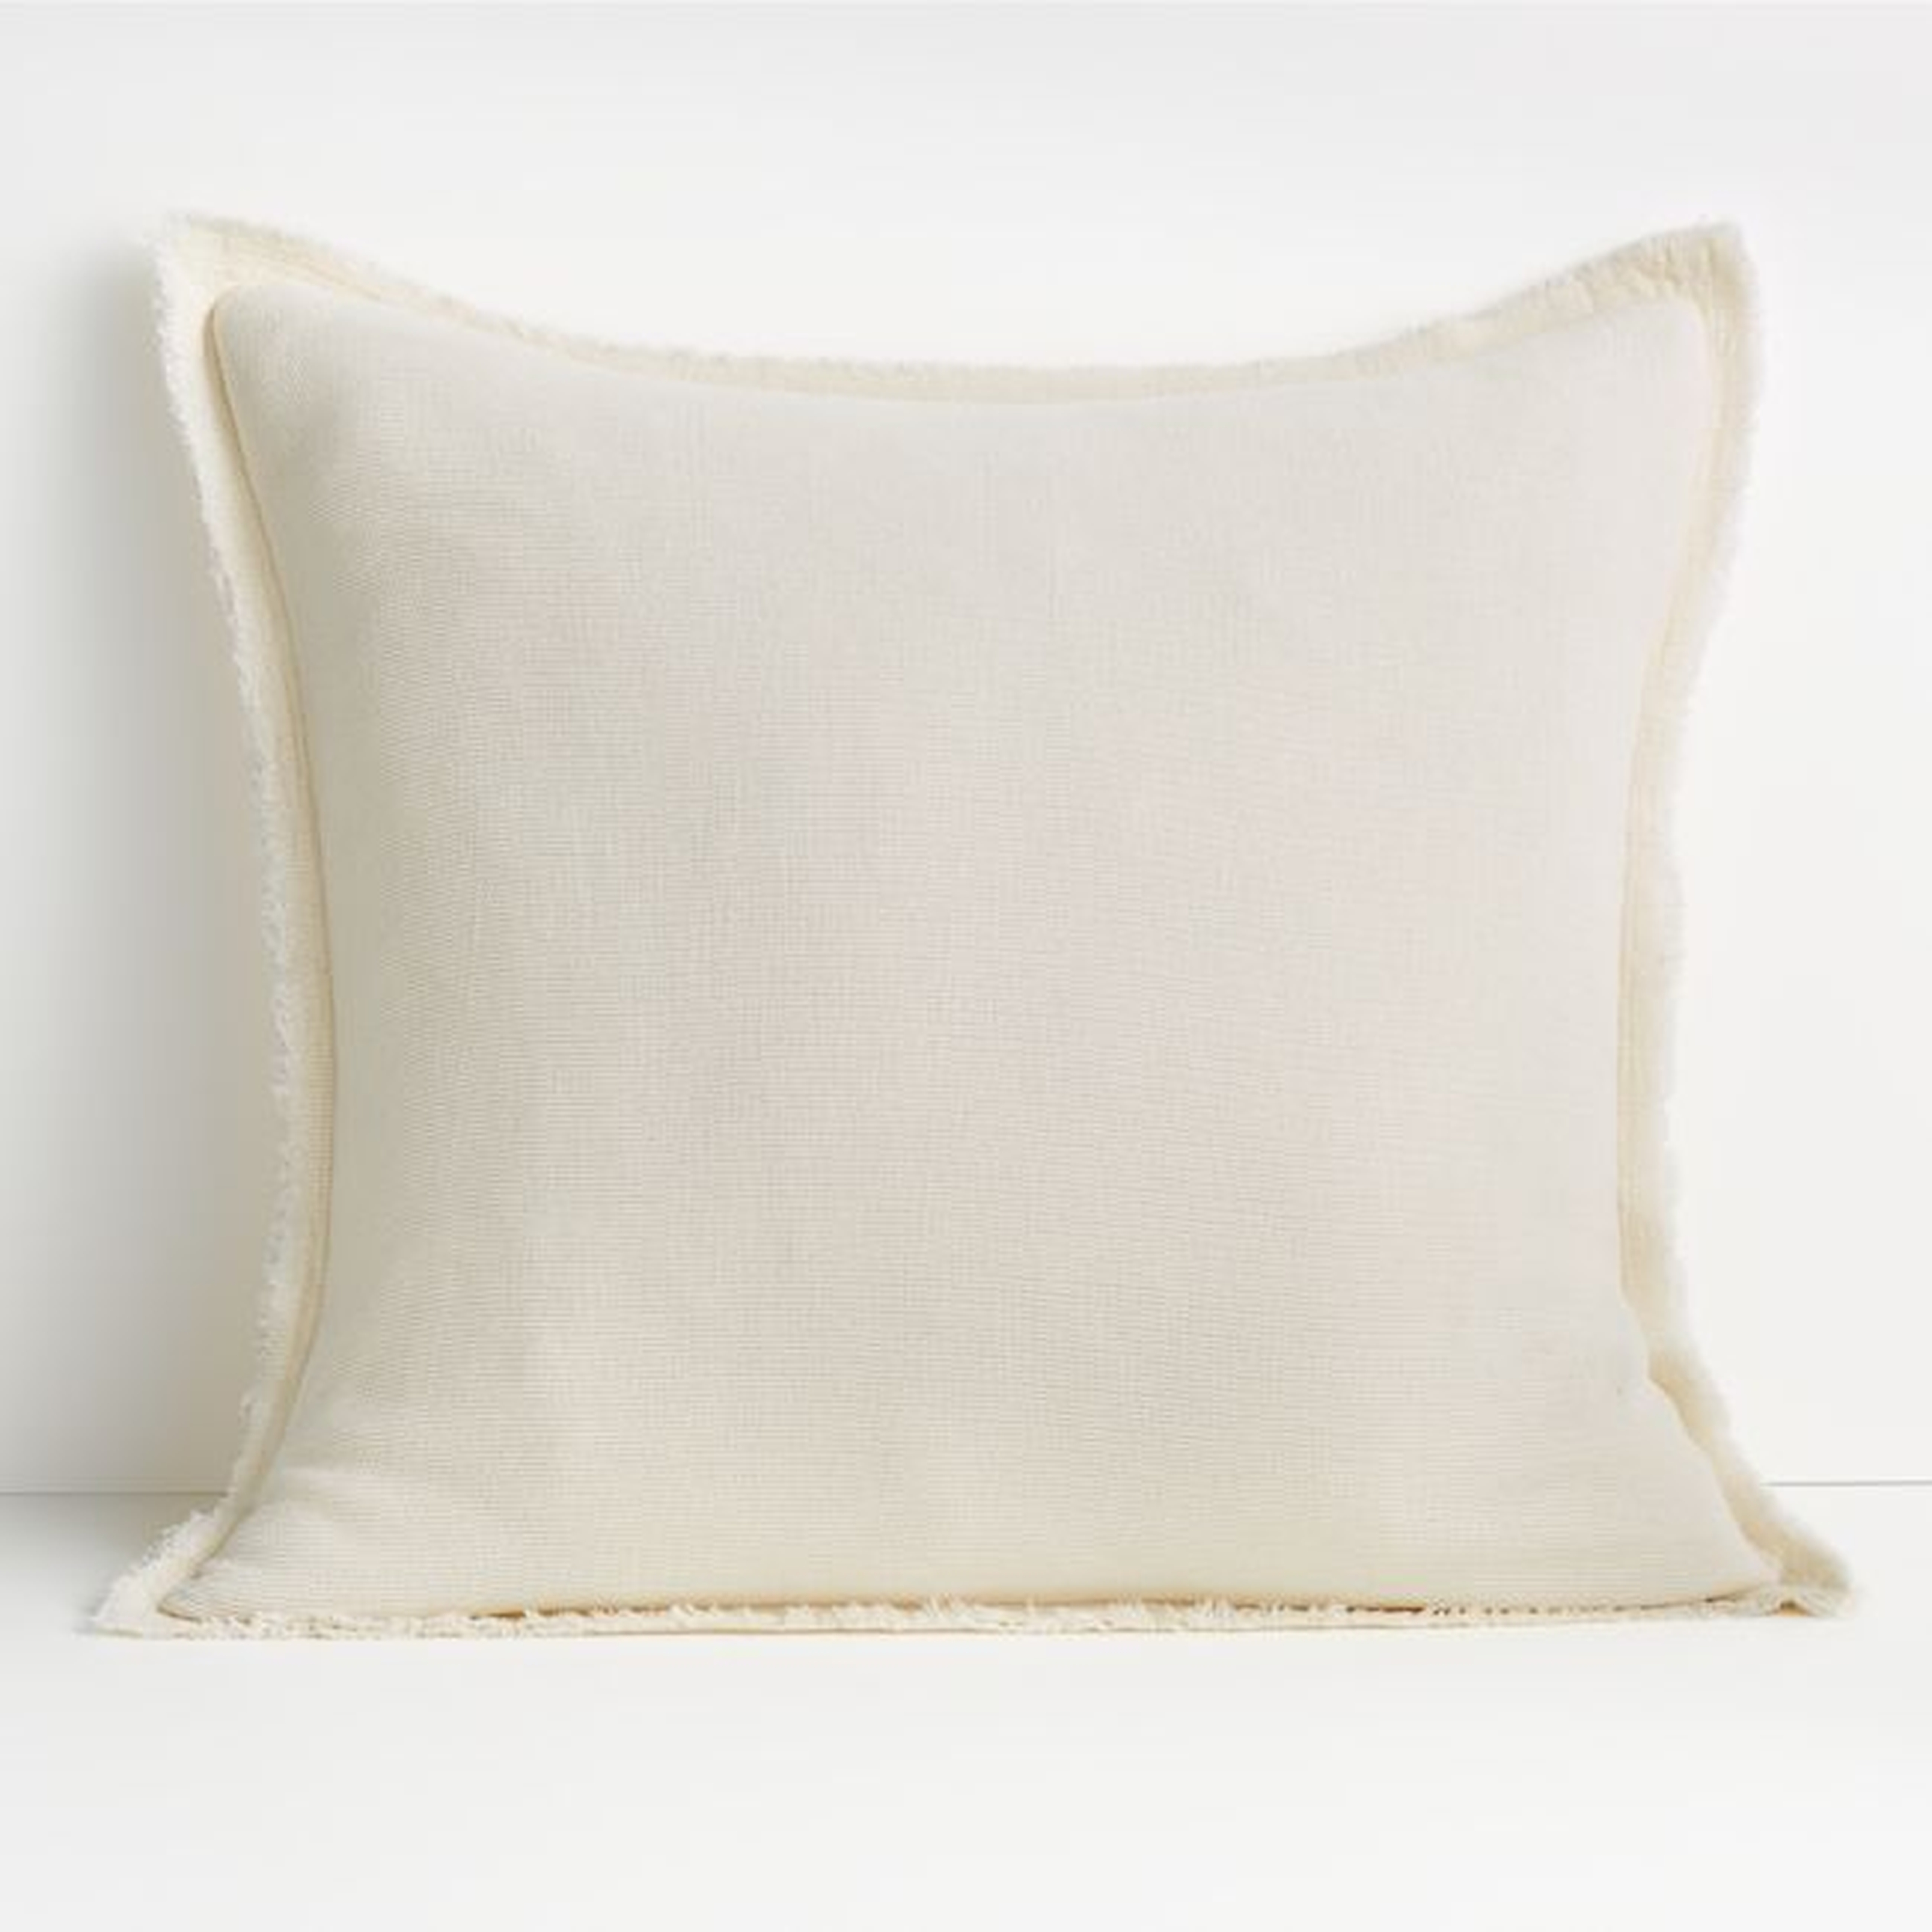 Olind 23"x23" Cream Throw Pillow with Down-Alternative Insert - Crate and Barrel